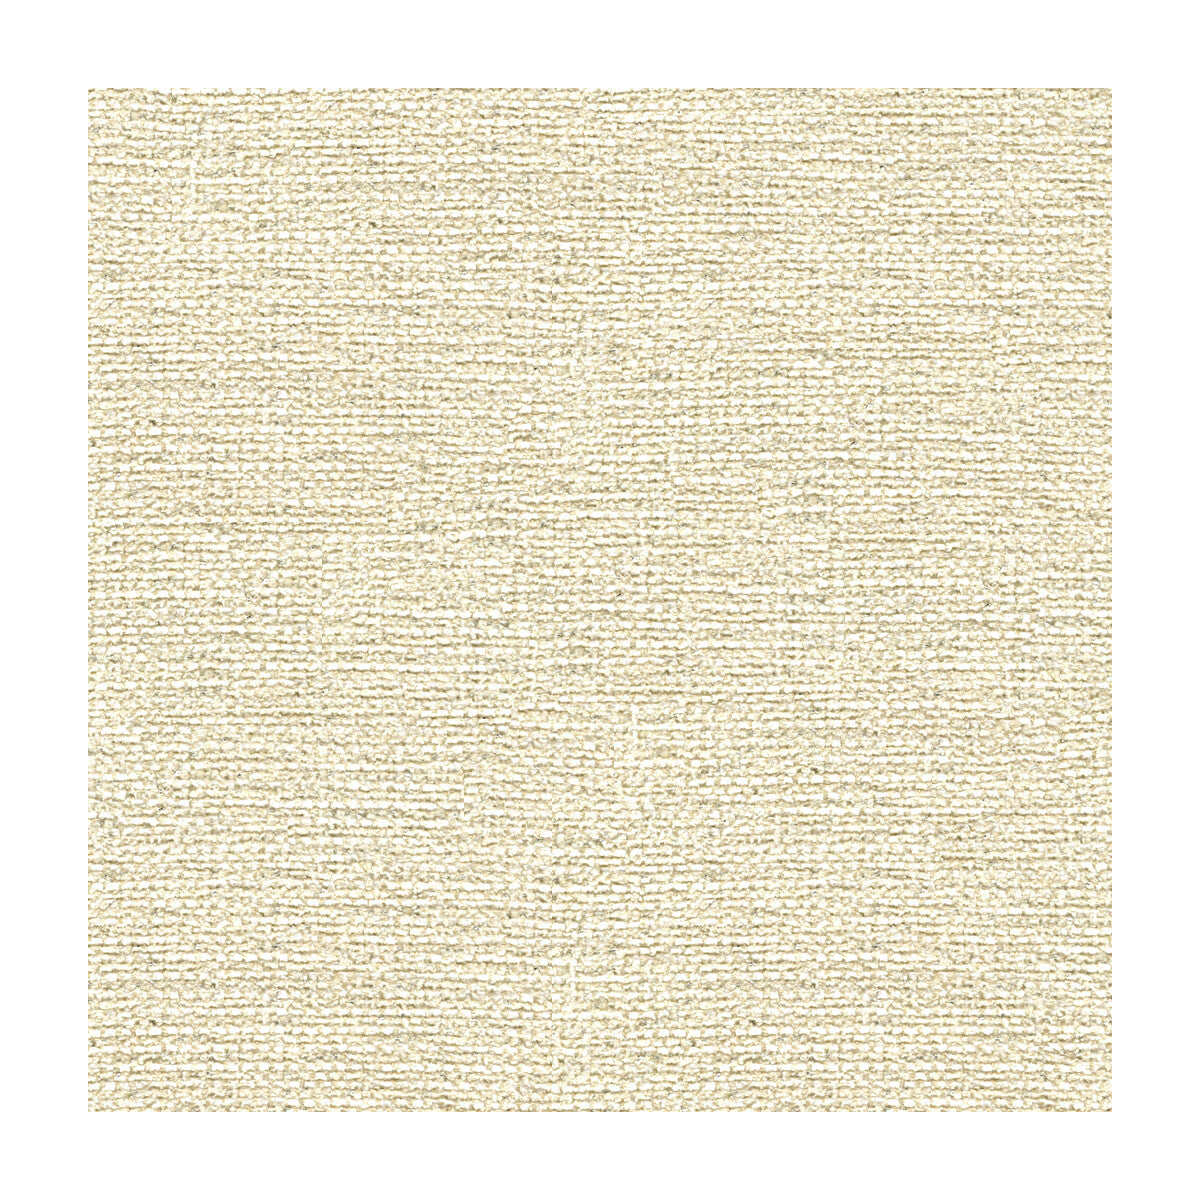 Heartbreaker fabric in vanilla color - pattern 33554.1.0 - by Kravet Couture in the Modern Luxe collection